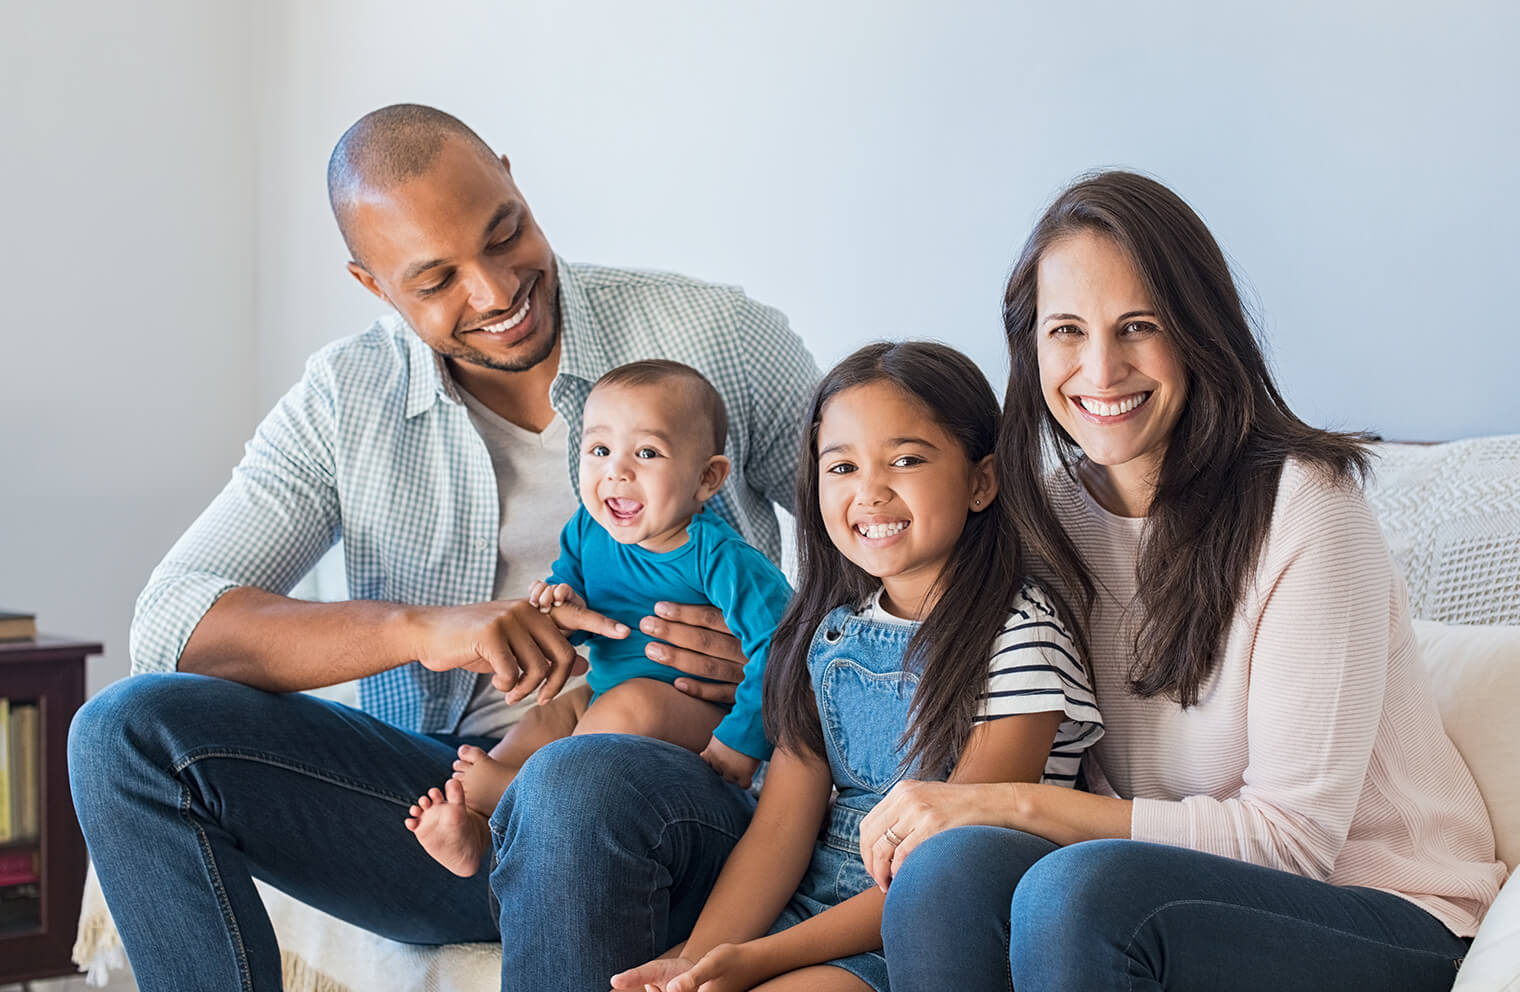 Picture of young, multi-ethnic family smiling and sitting on a couch. From left to right: A father, son, daughter and mother.